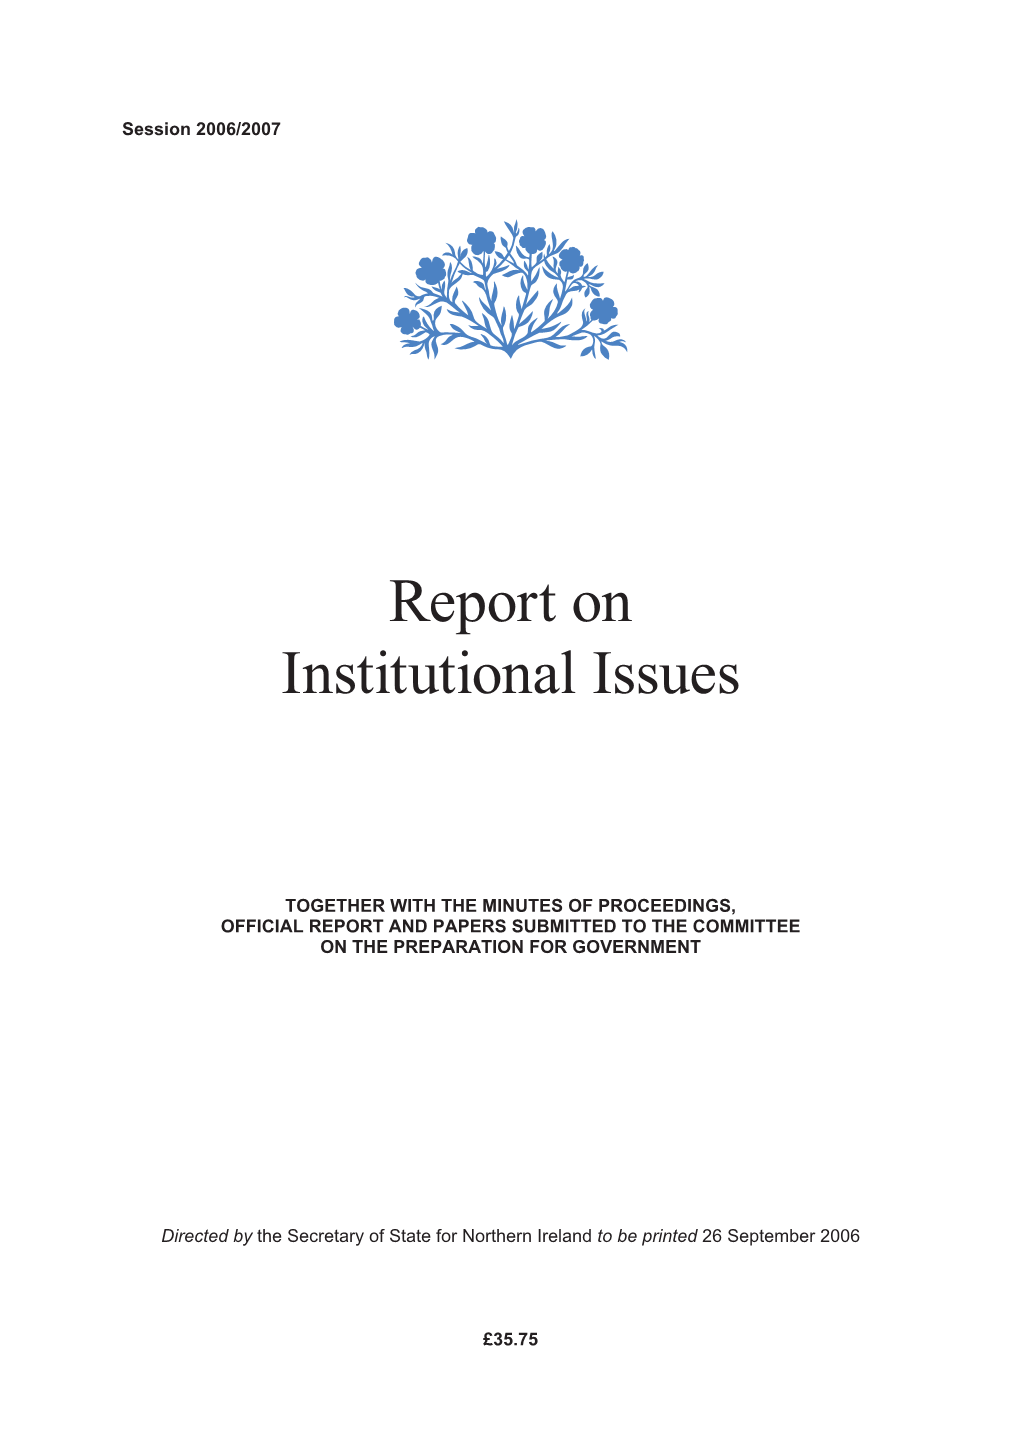 Report on Institutional Issues